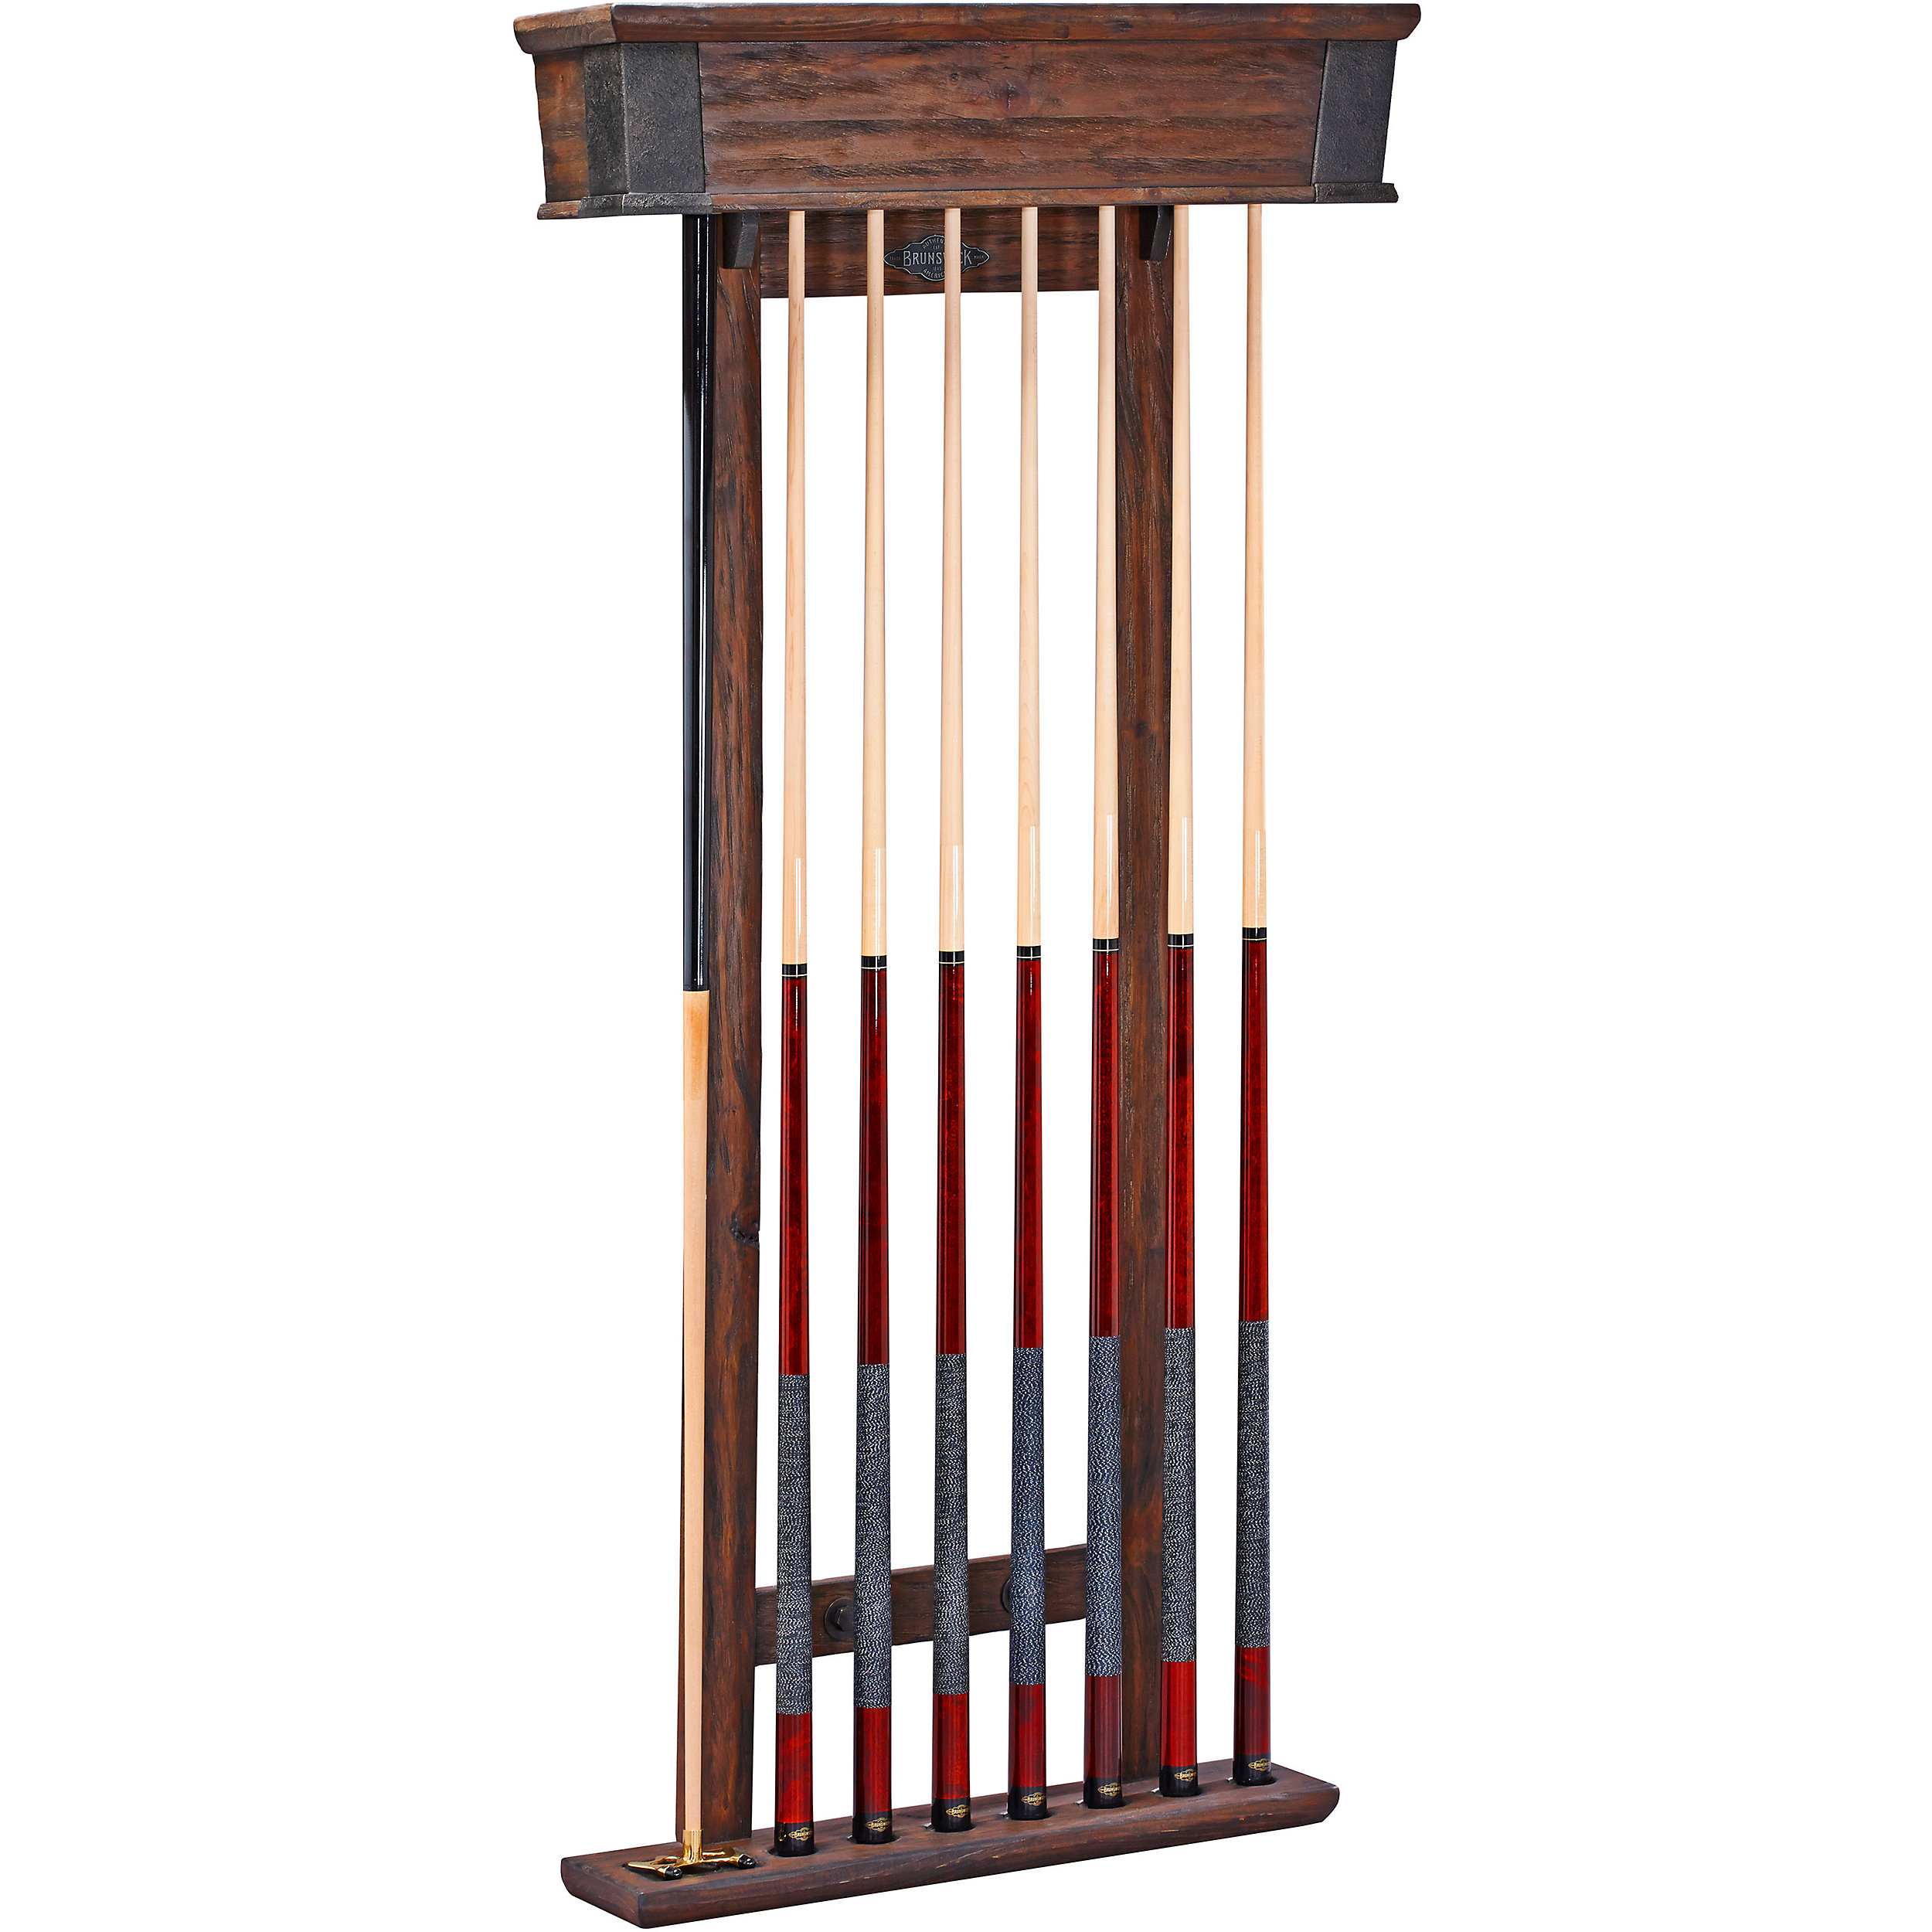 Pub Style CUE RACK for 6 Cues FROM ***SUPERPOOL*** 